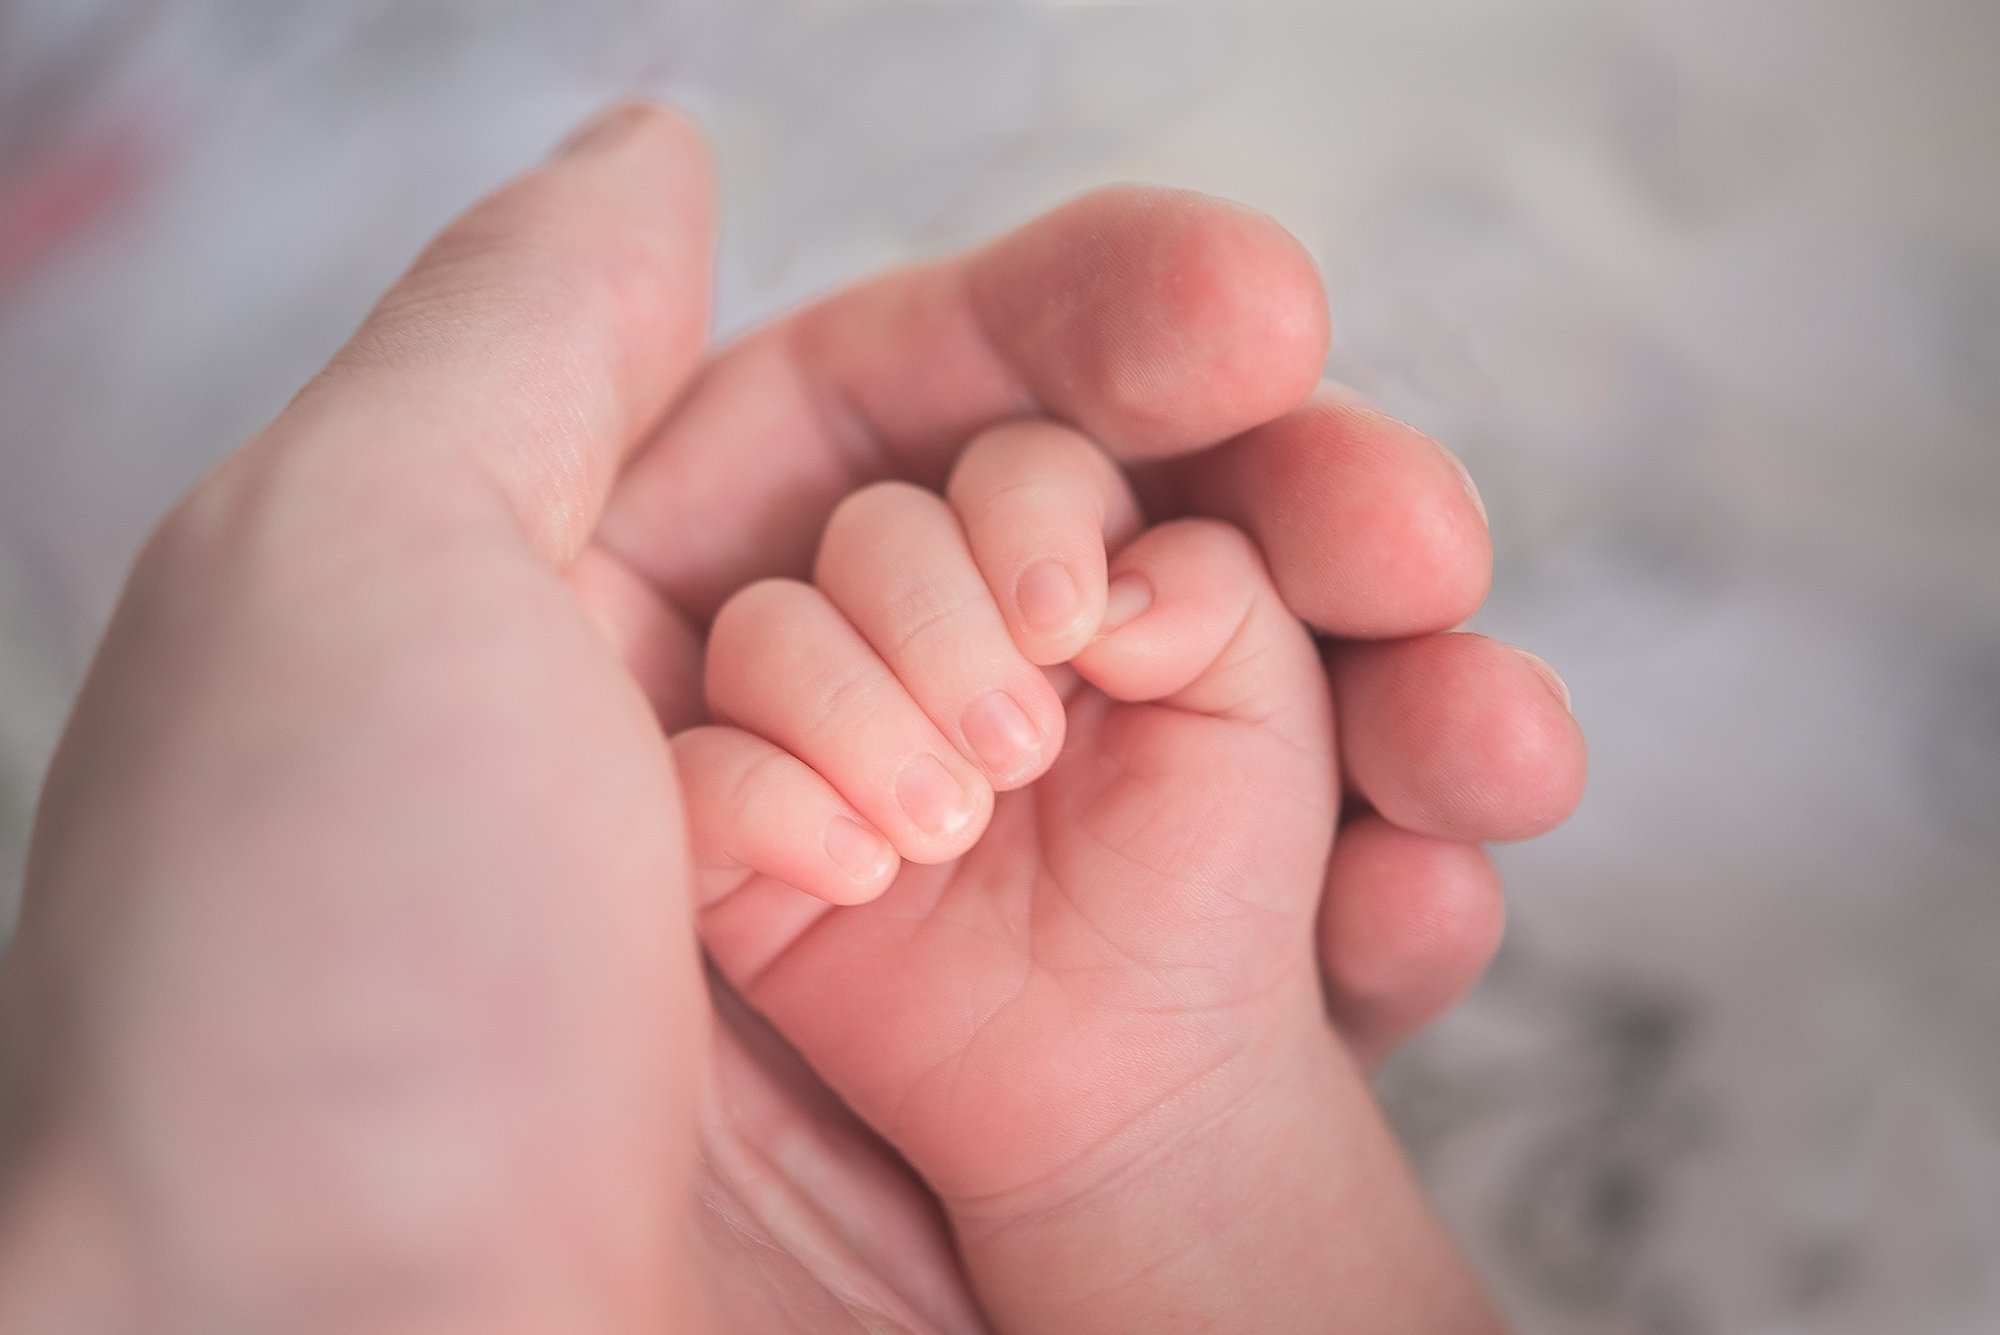 A small babyhand in a parent's hand.